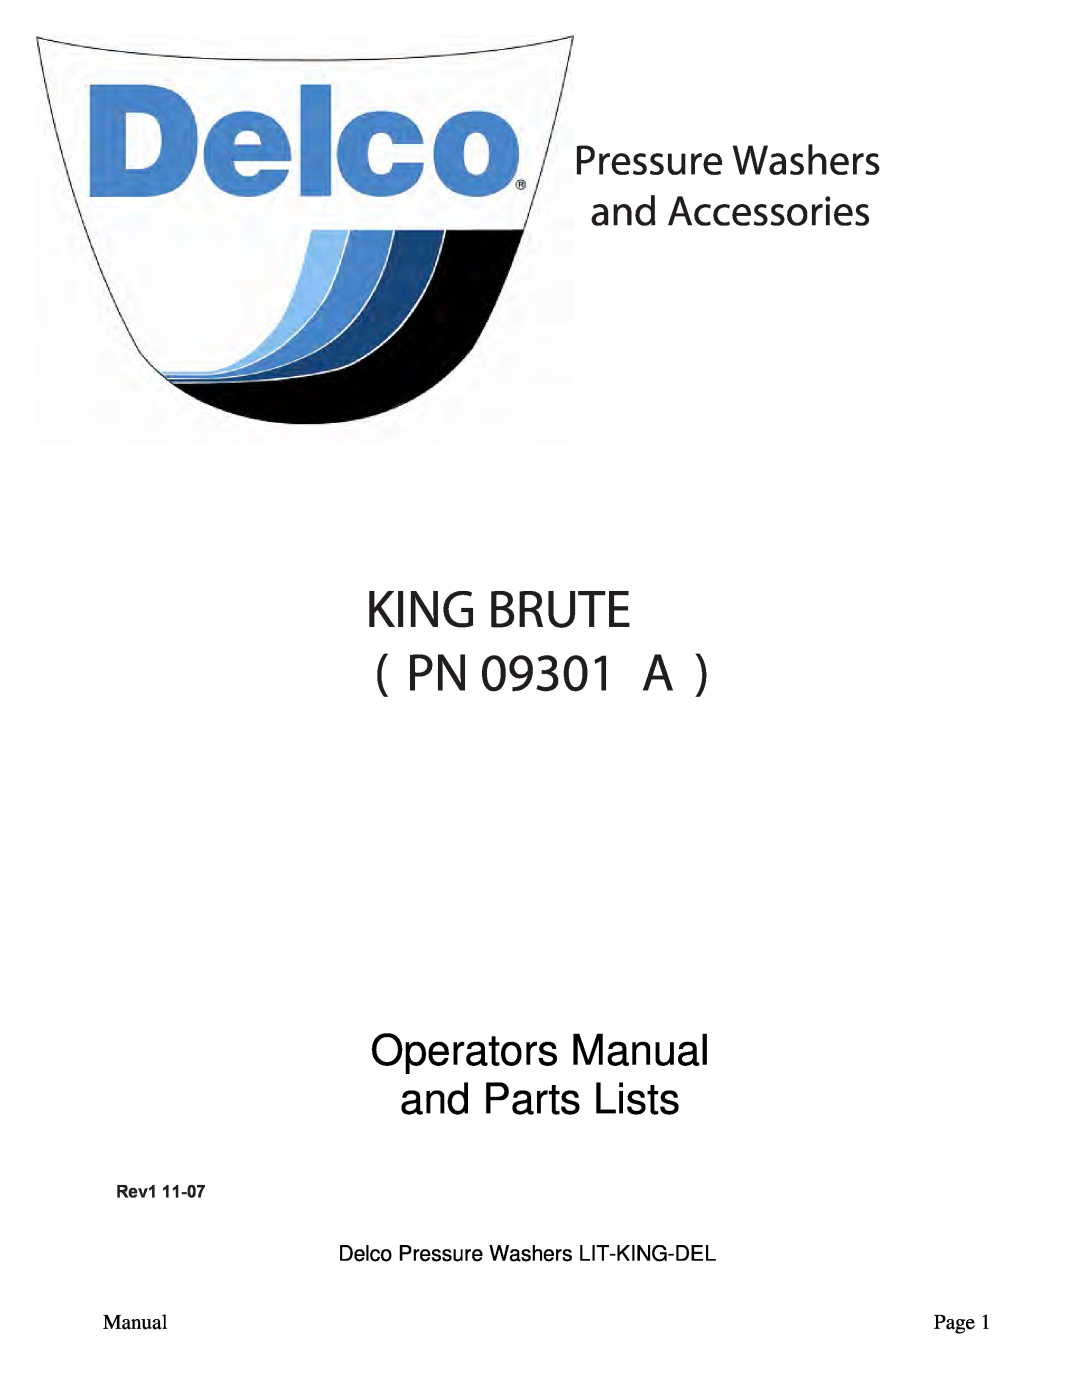 ACDelco manual Pressure Washers and Accessories, Operators Manual and Parts Lists, Page, KING BRUTE PN 09301 A, Rev1 